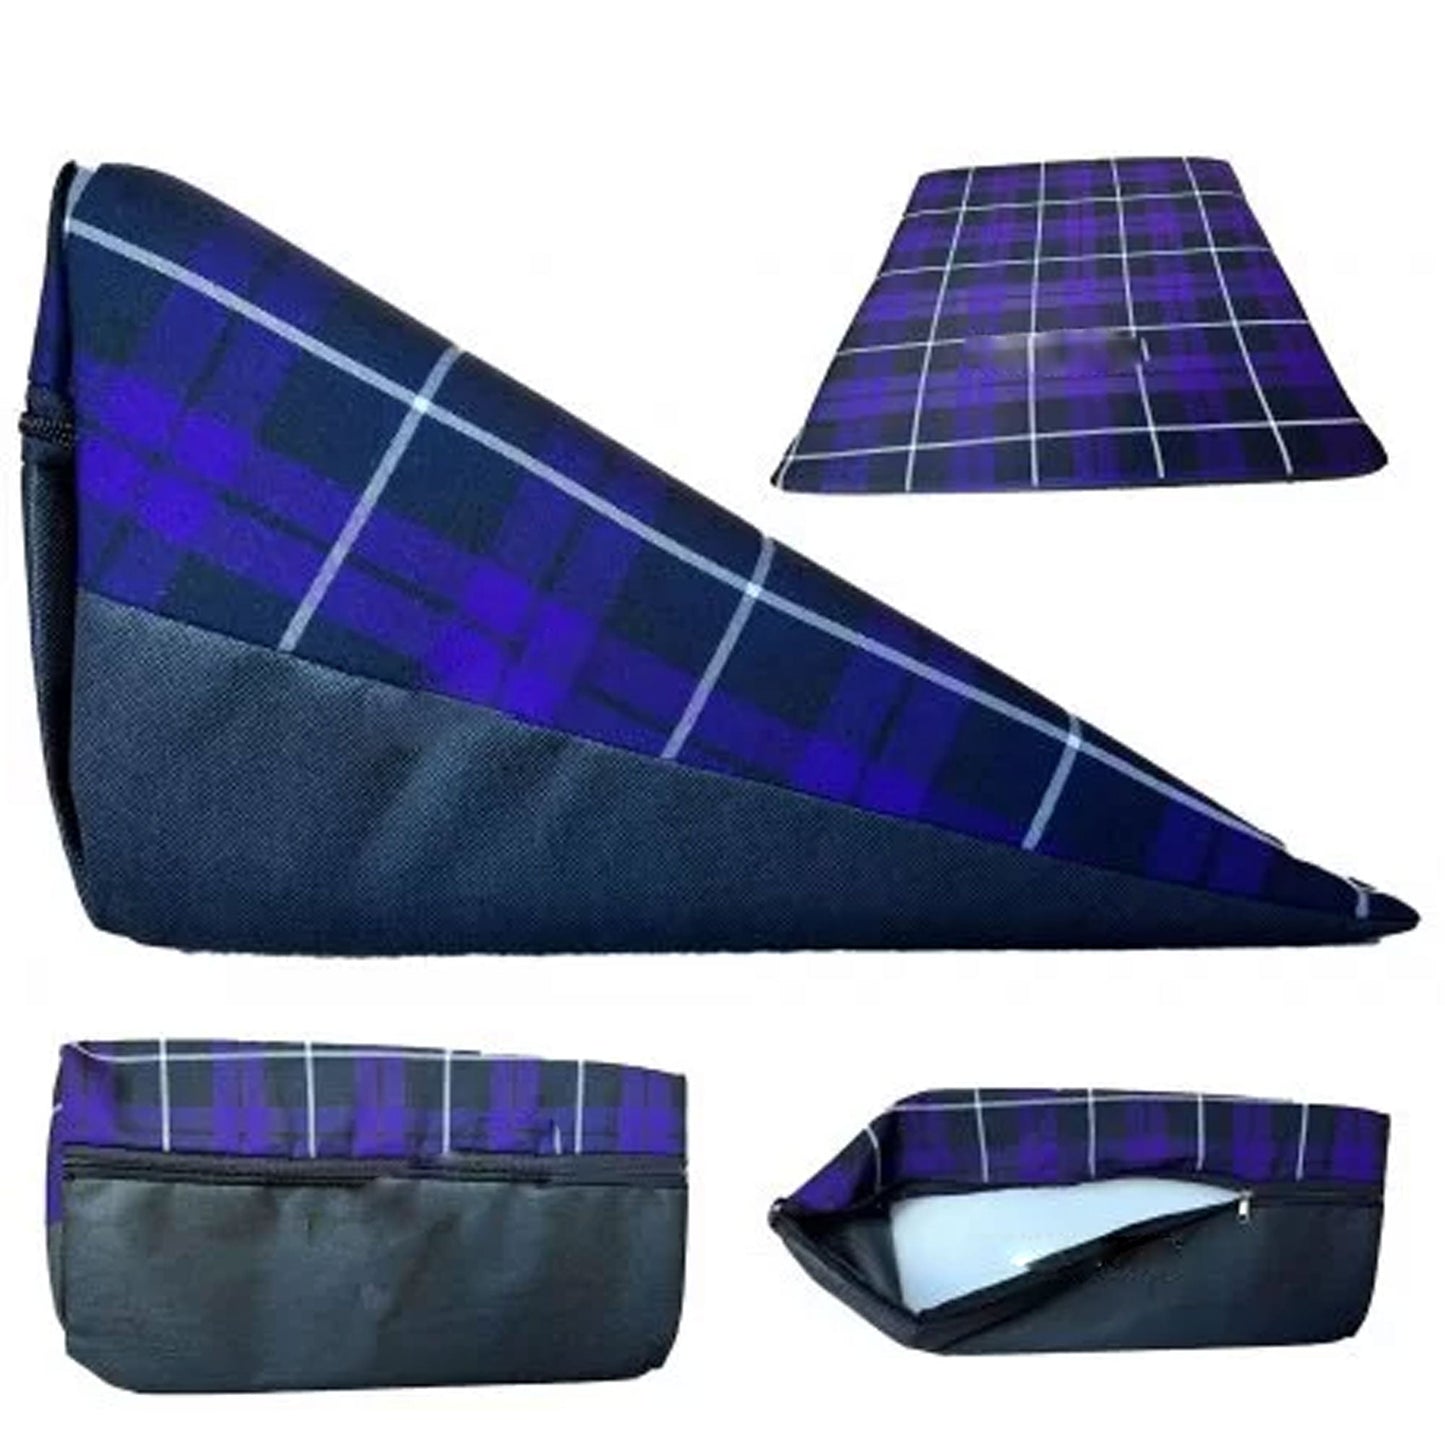 Large Acid Reflux Flex Support Bed Wedge Pillow with Quilted or Tartan Design Cover - TheComfortshop.co.ukPillows0721718971634thecomfortshopTheComfortshop.co.ukBACK Wedge TARTAN PURPLE TOPTartan Purple TopLarge Acid Reflux Flex Support Bed Wedge Pillow with Quilted or Tartan Design Cover - TheComfortshop.co.uk